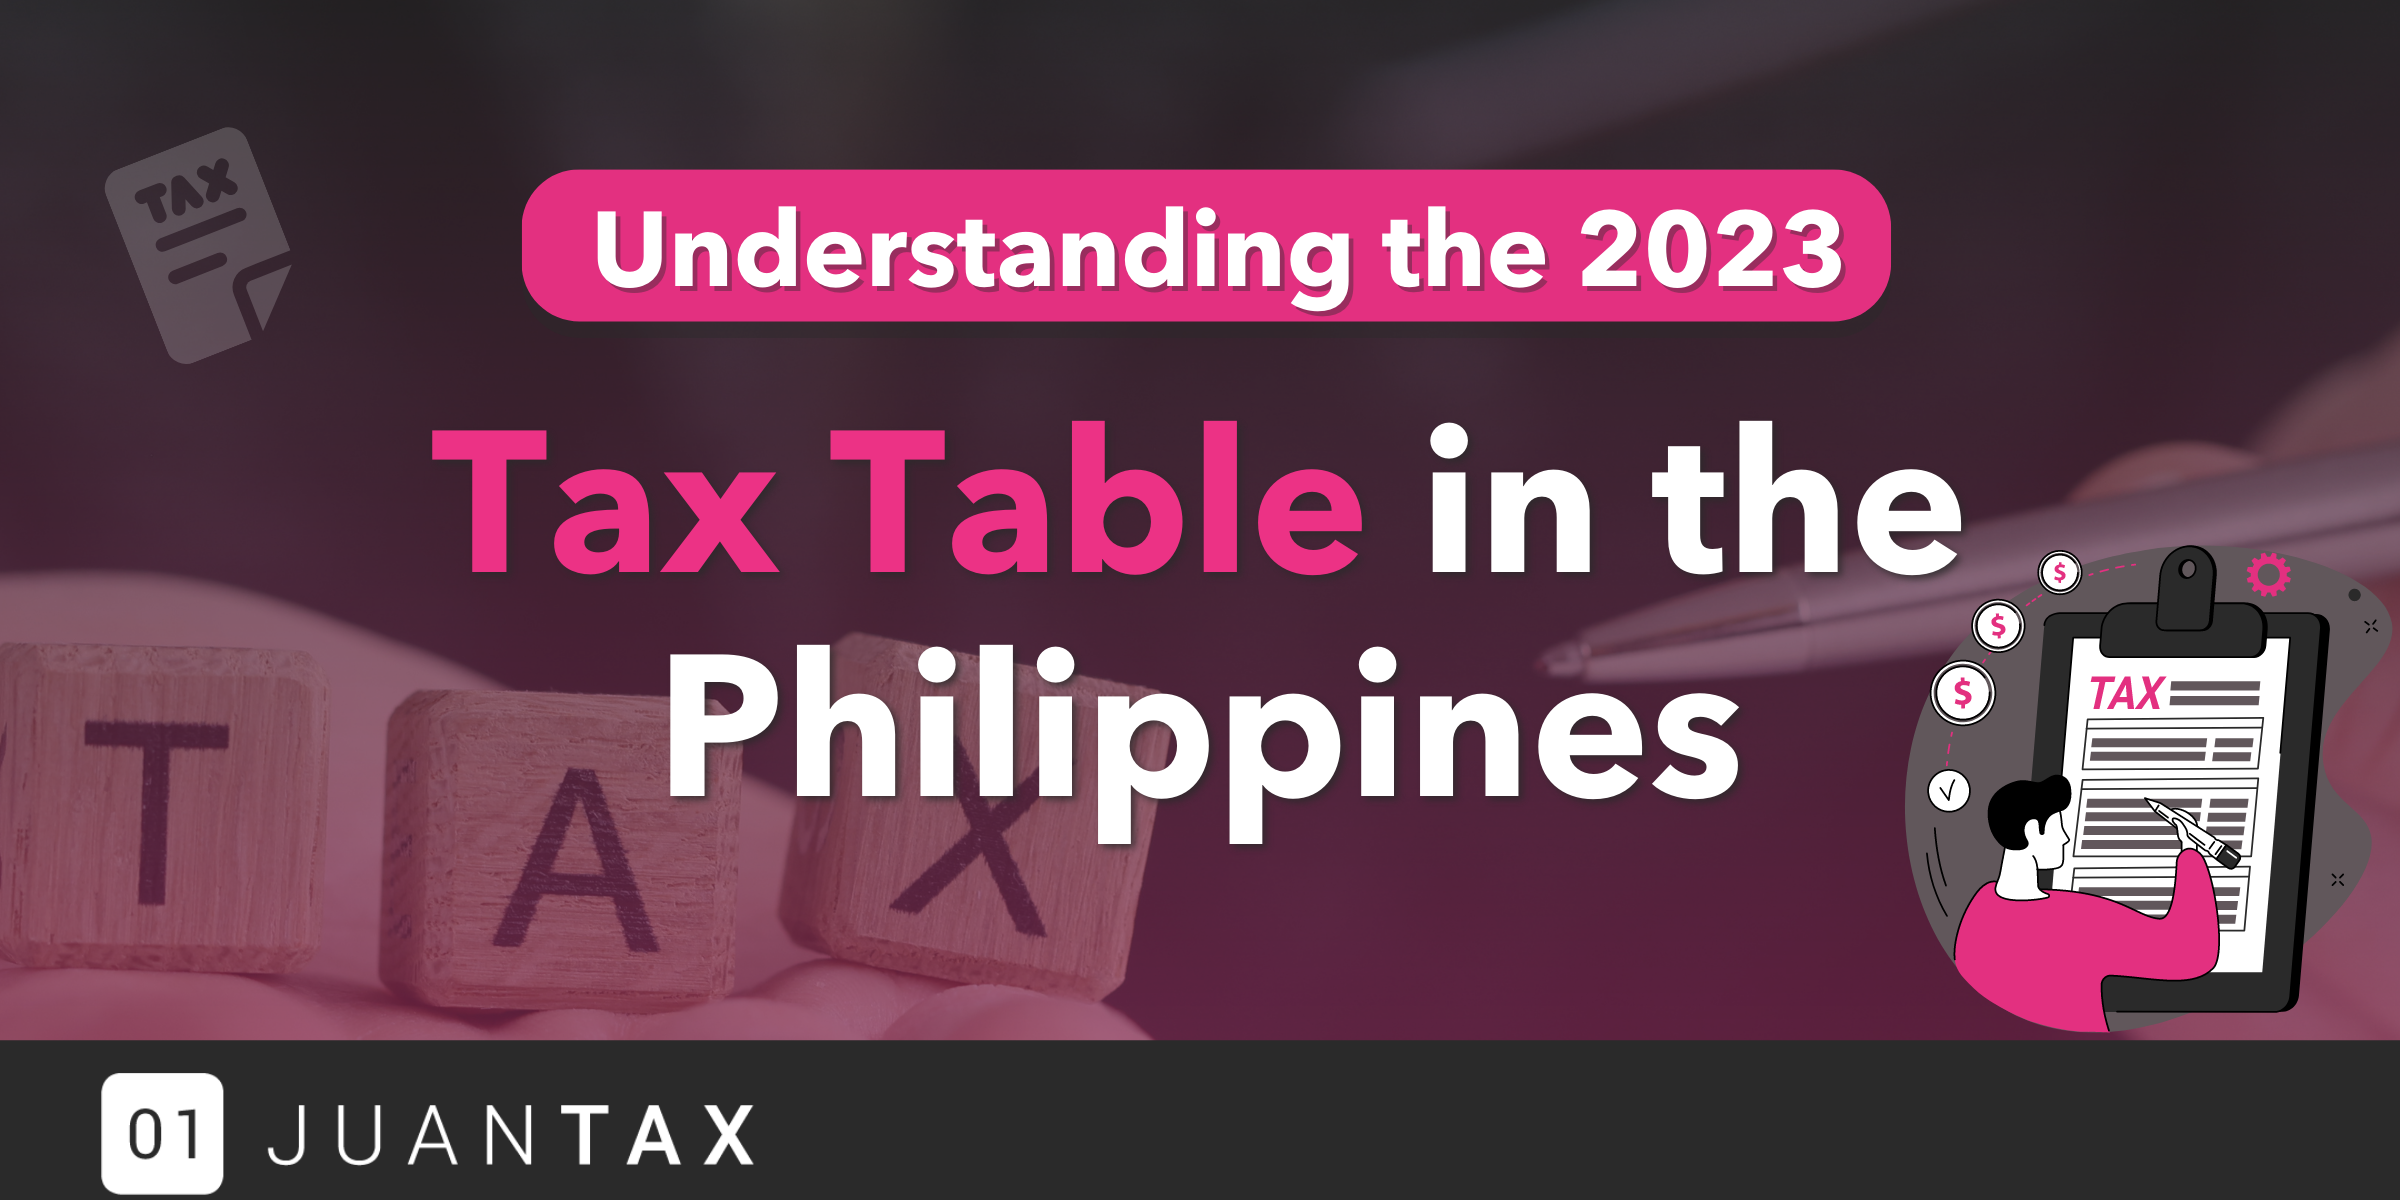 Understanding the 2023 Tax Table in the Philippines